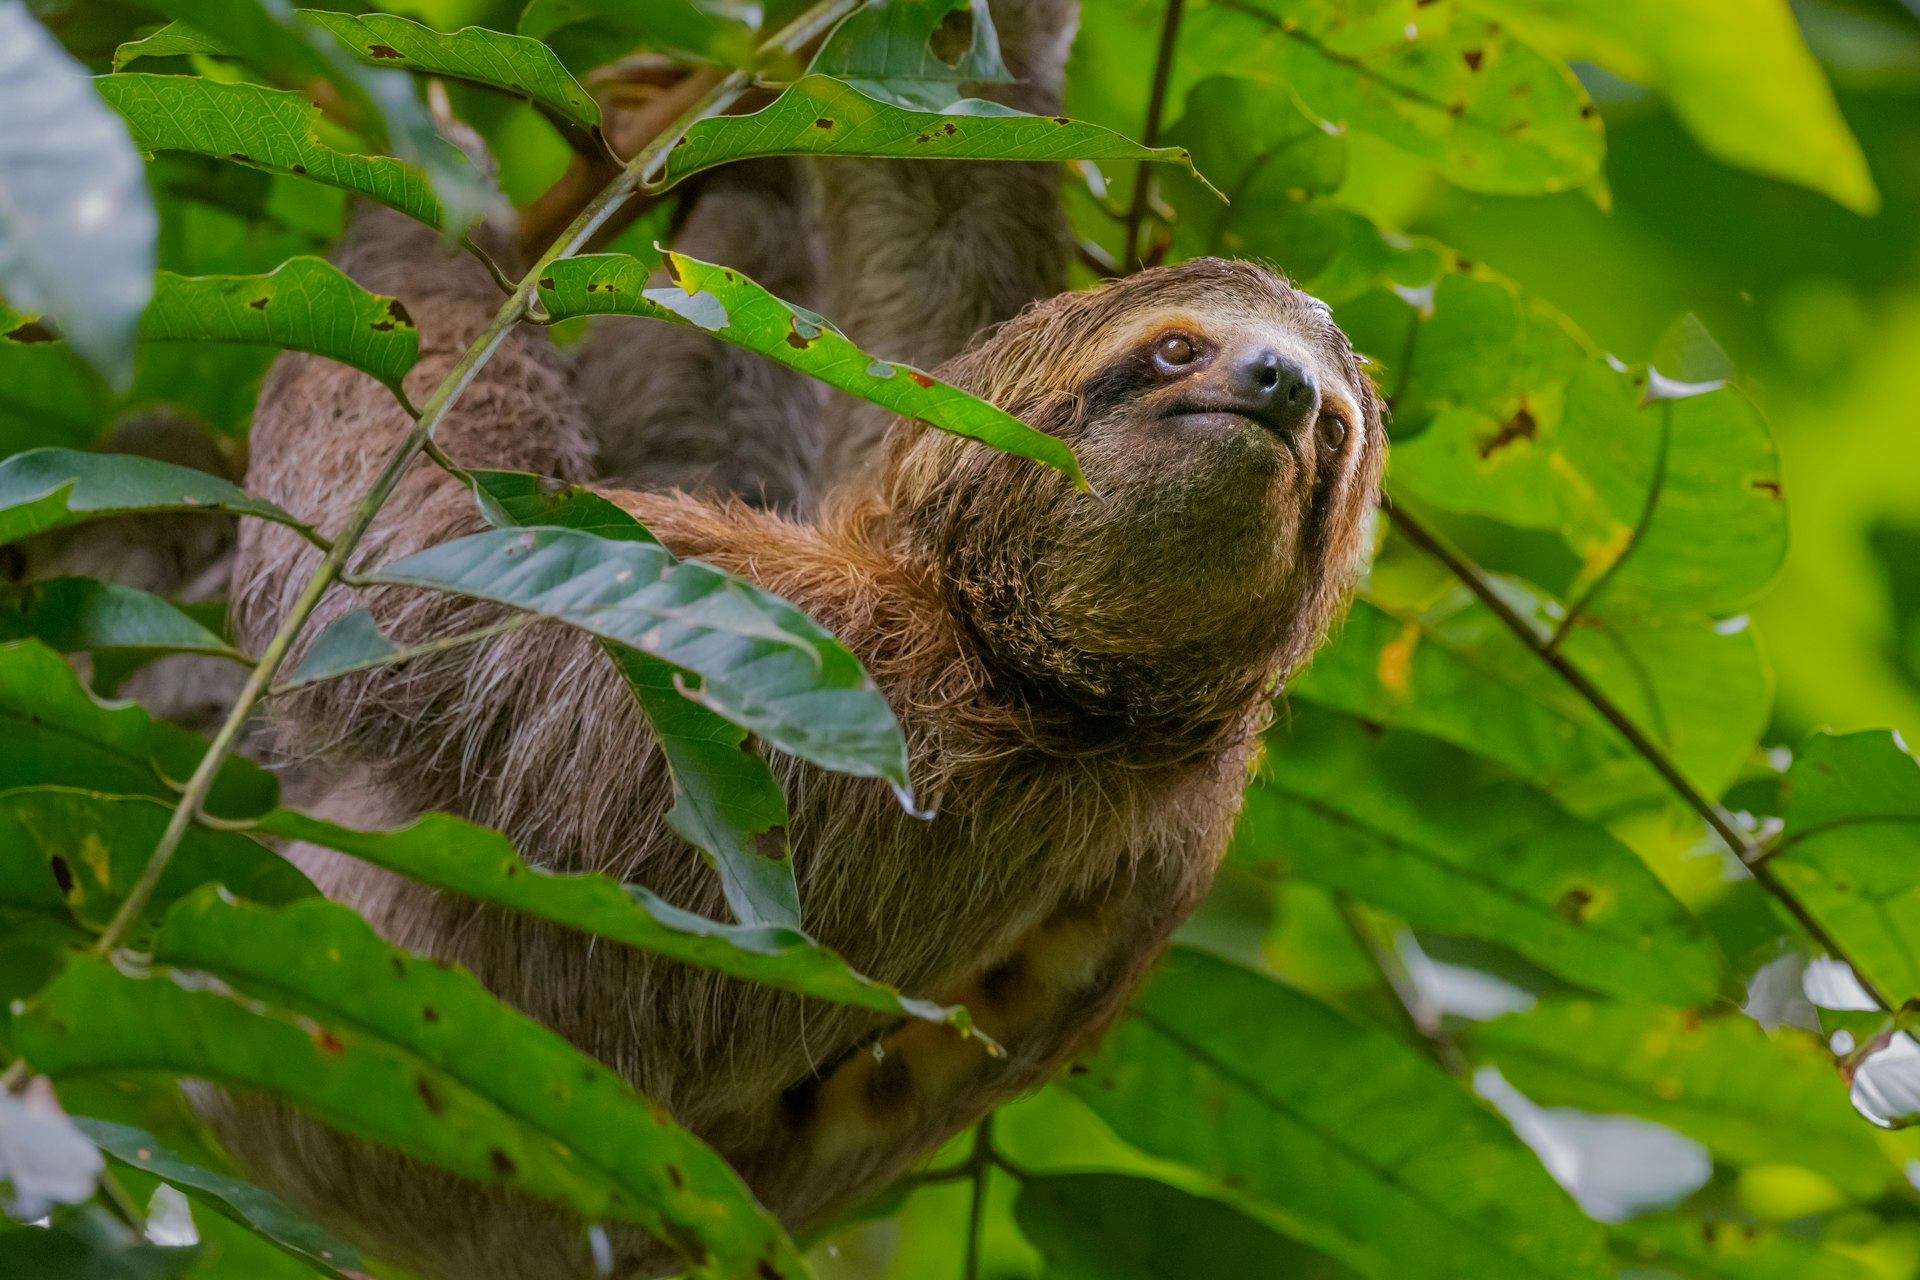 A sloth in the trees at Manuel Antonio National Park, Costa Rica